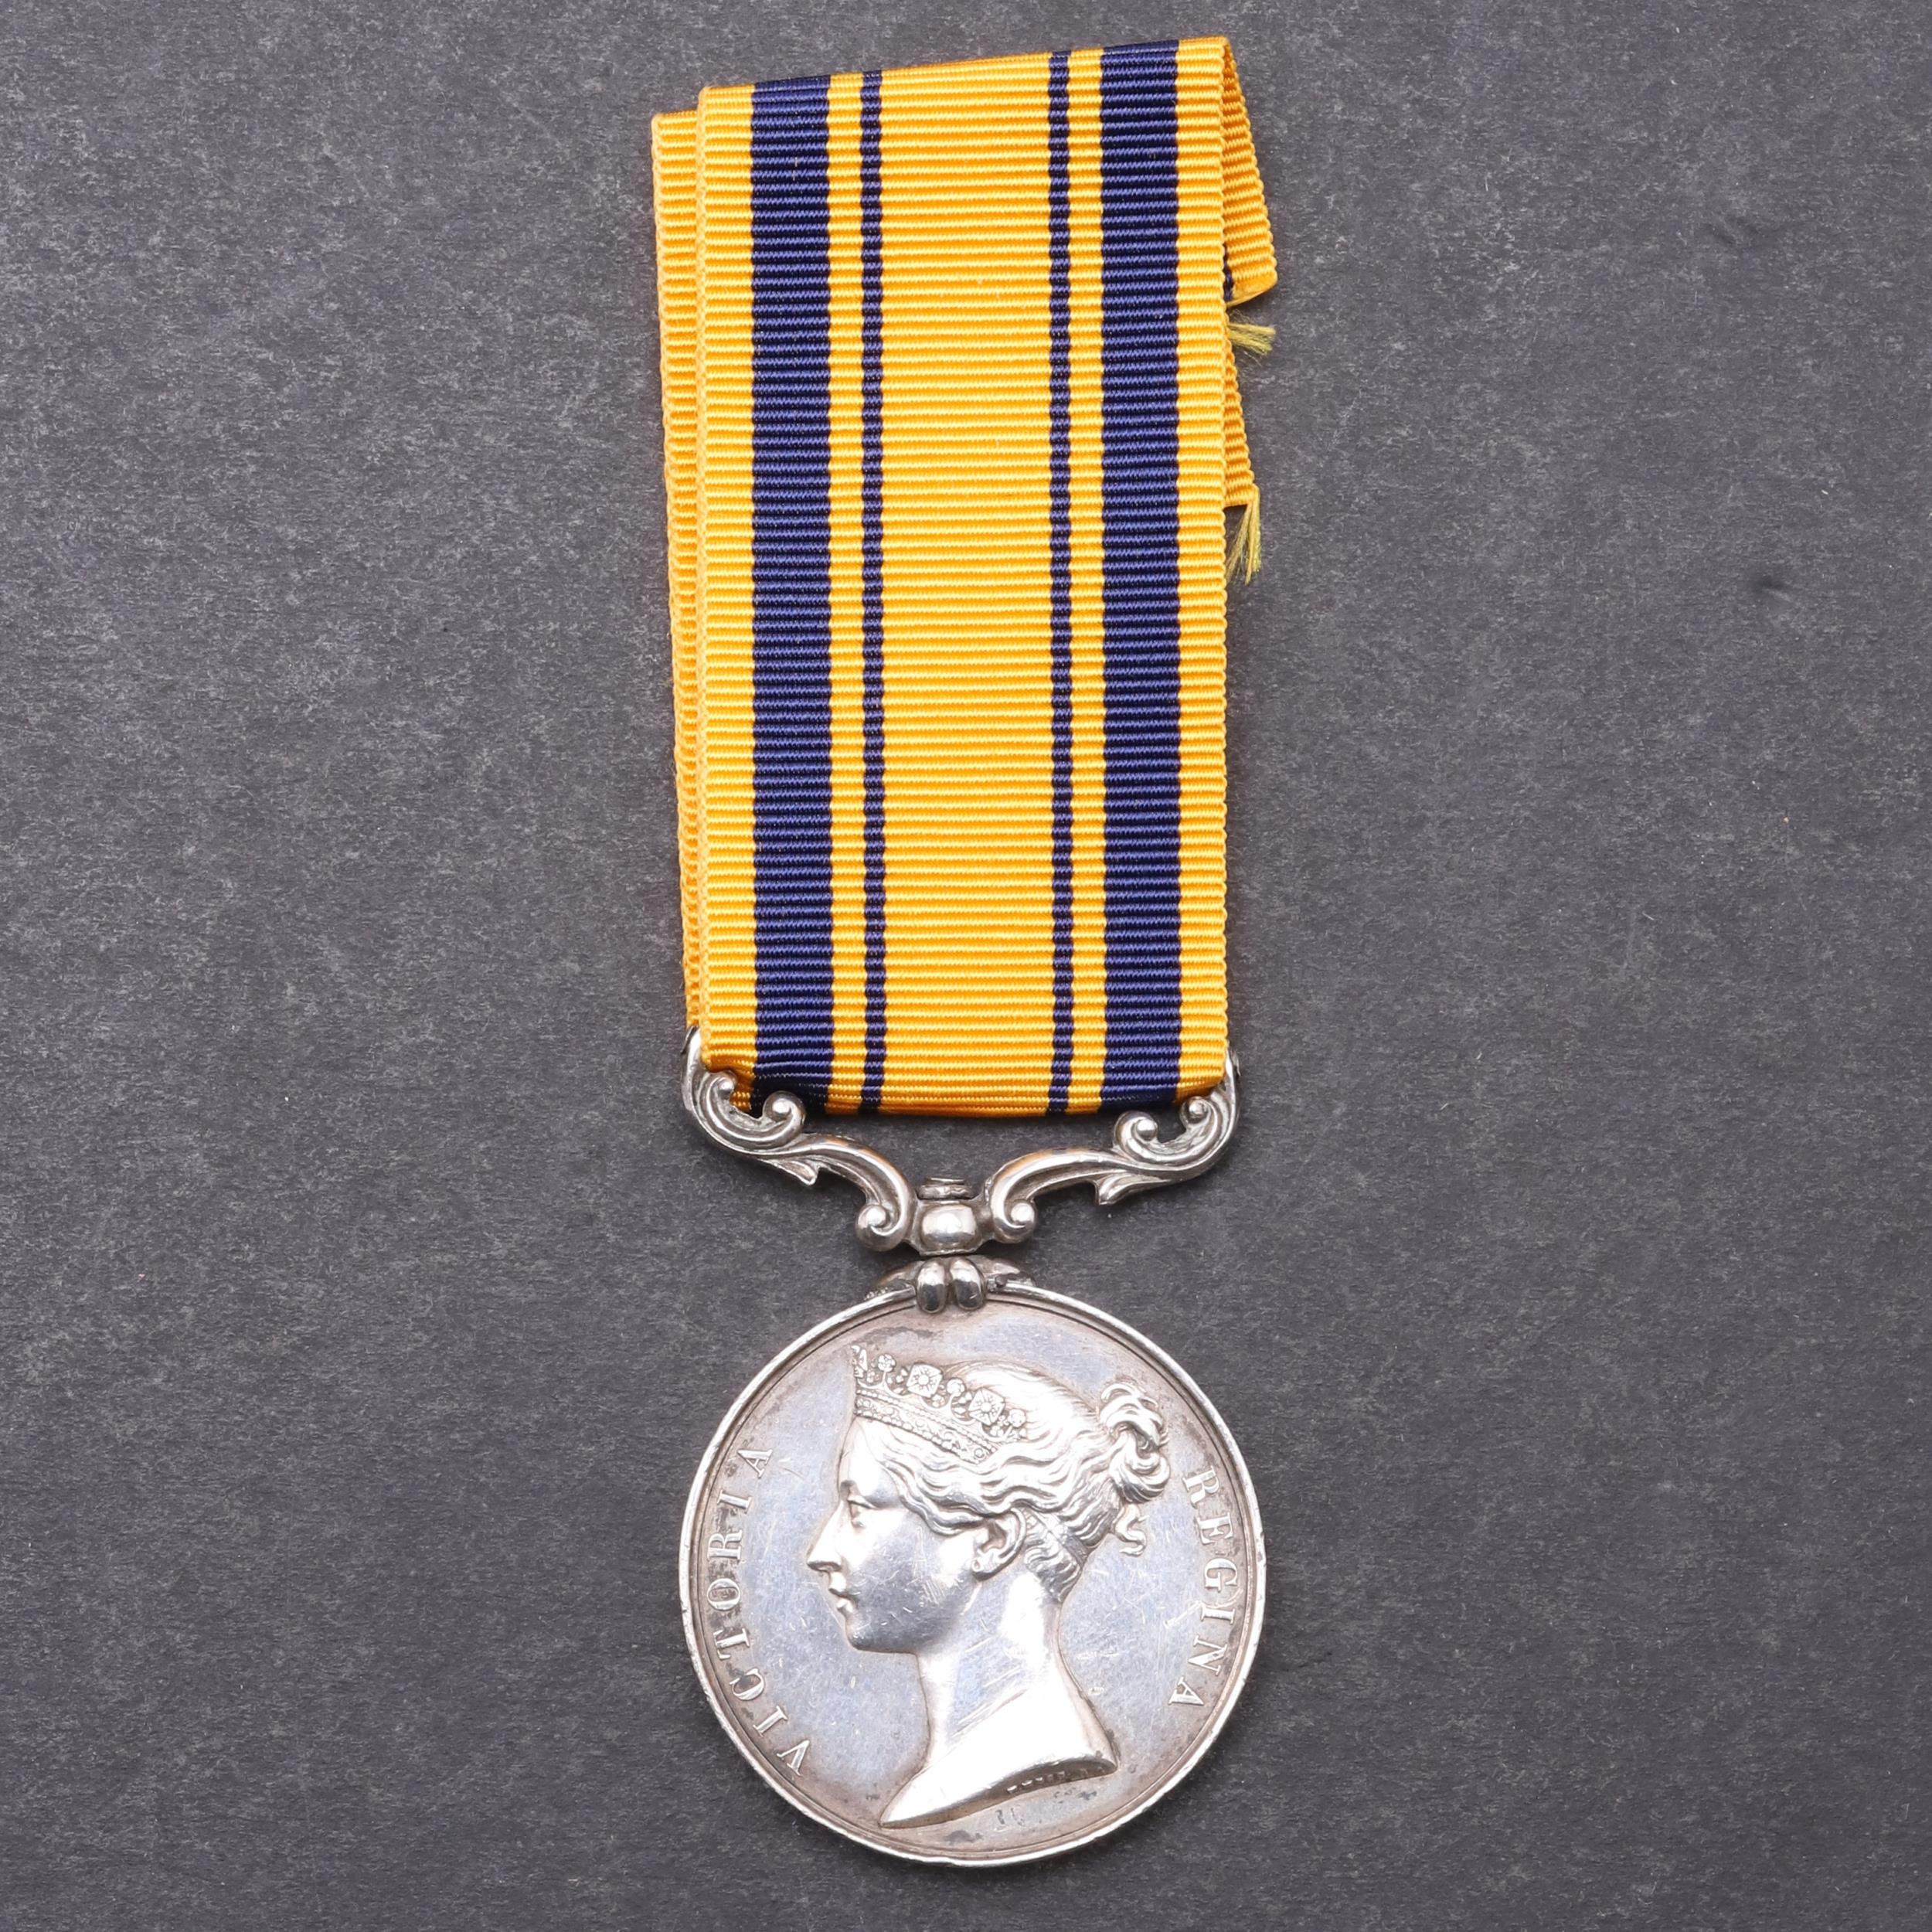 A SOUTH AFRICA 1853 MEDAL POSSIBLY TO DEPUTY ASST. COMMISSARY GENERAL STRICKLAND.